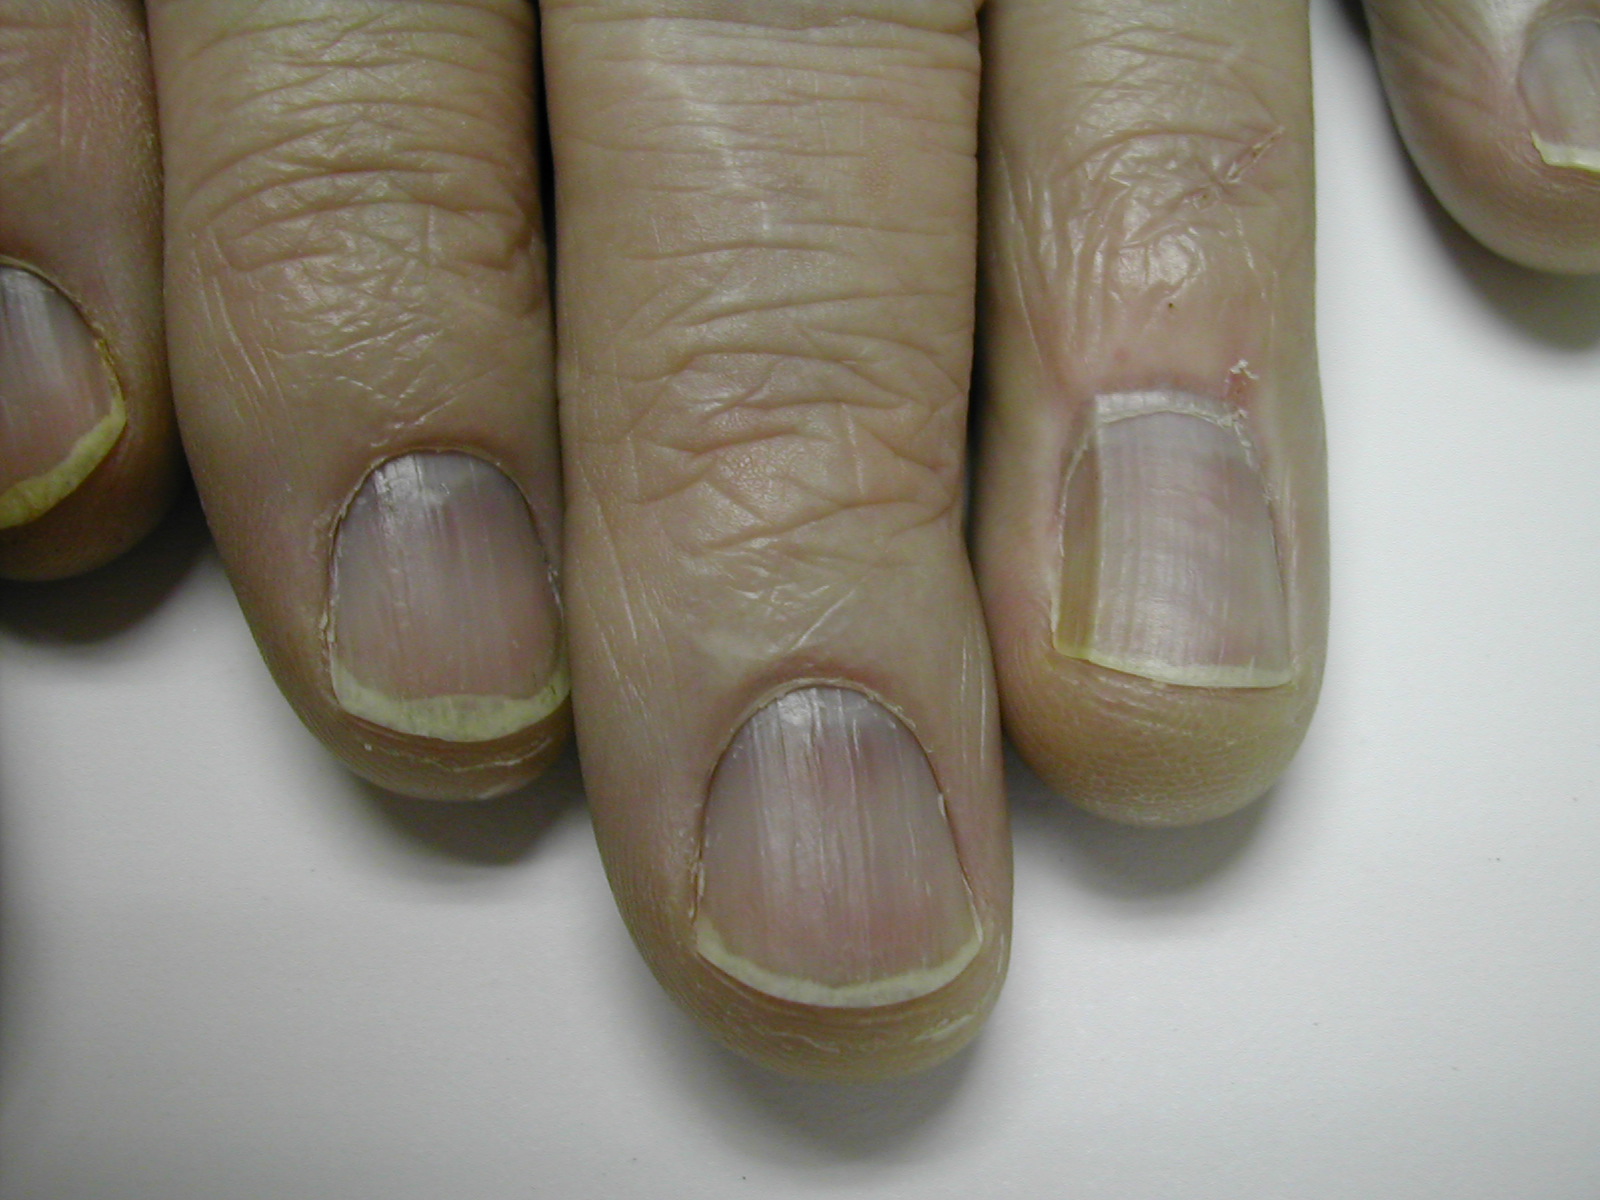 Nailfold Changes as a Sign of Underlying Systemic Illnesses